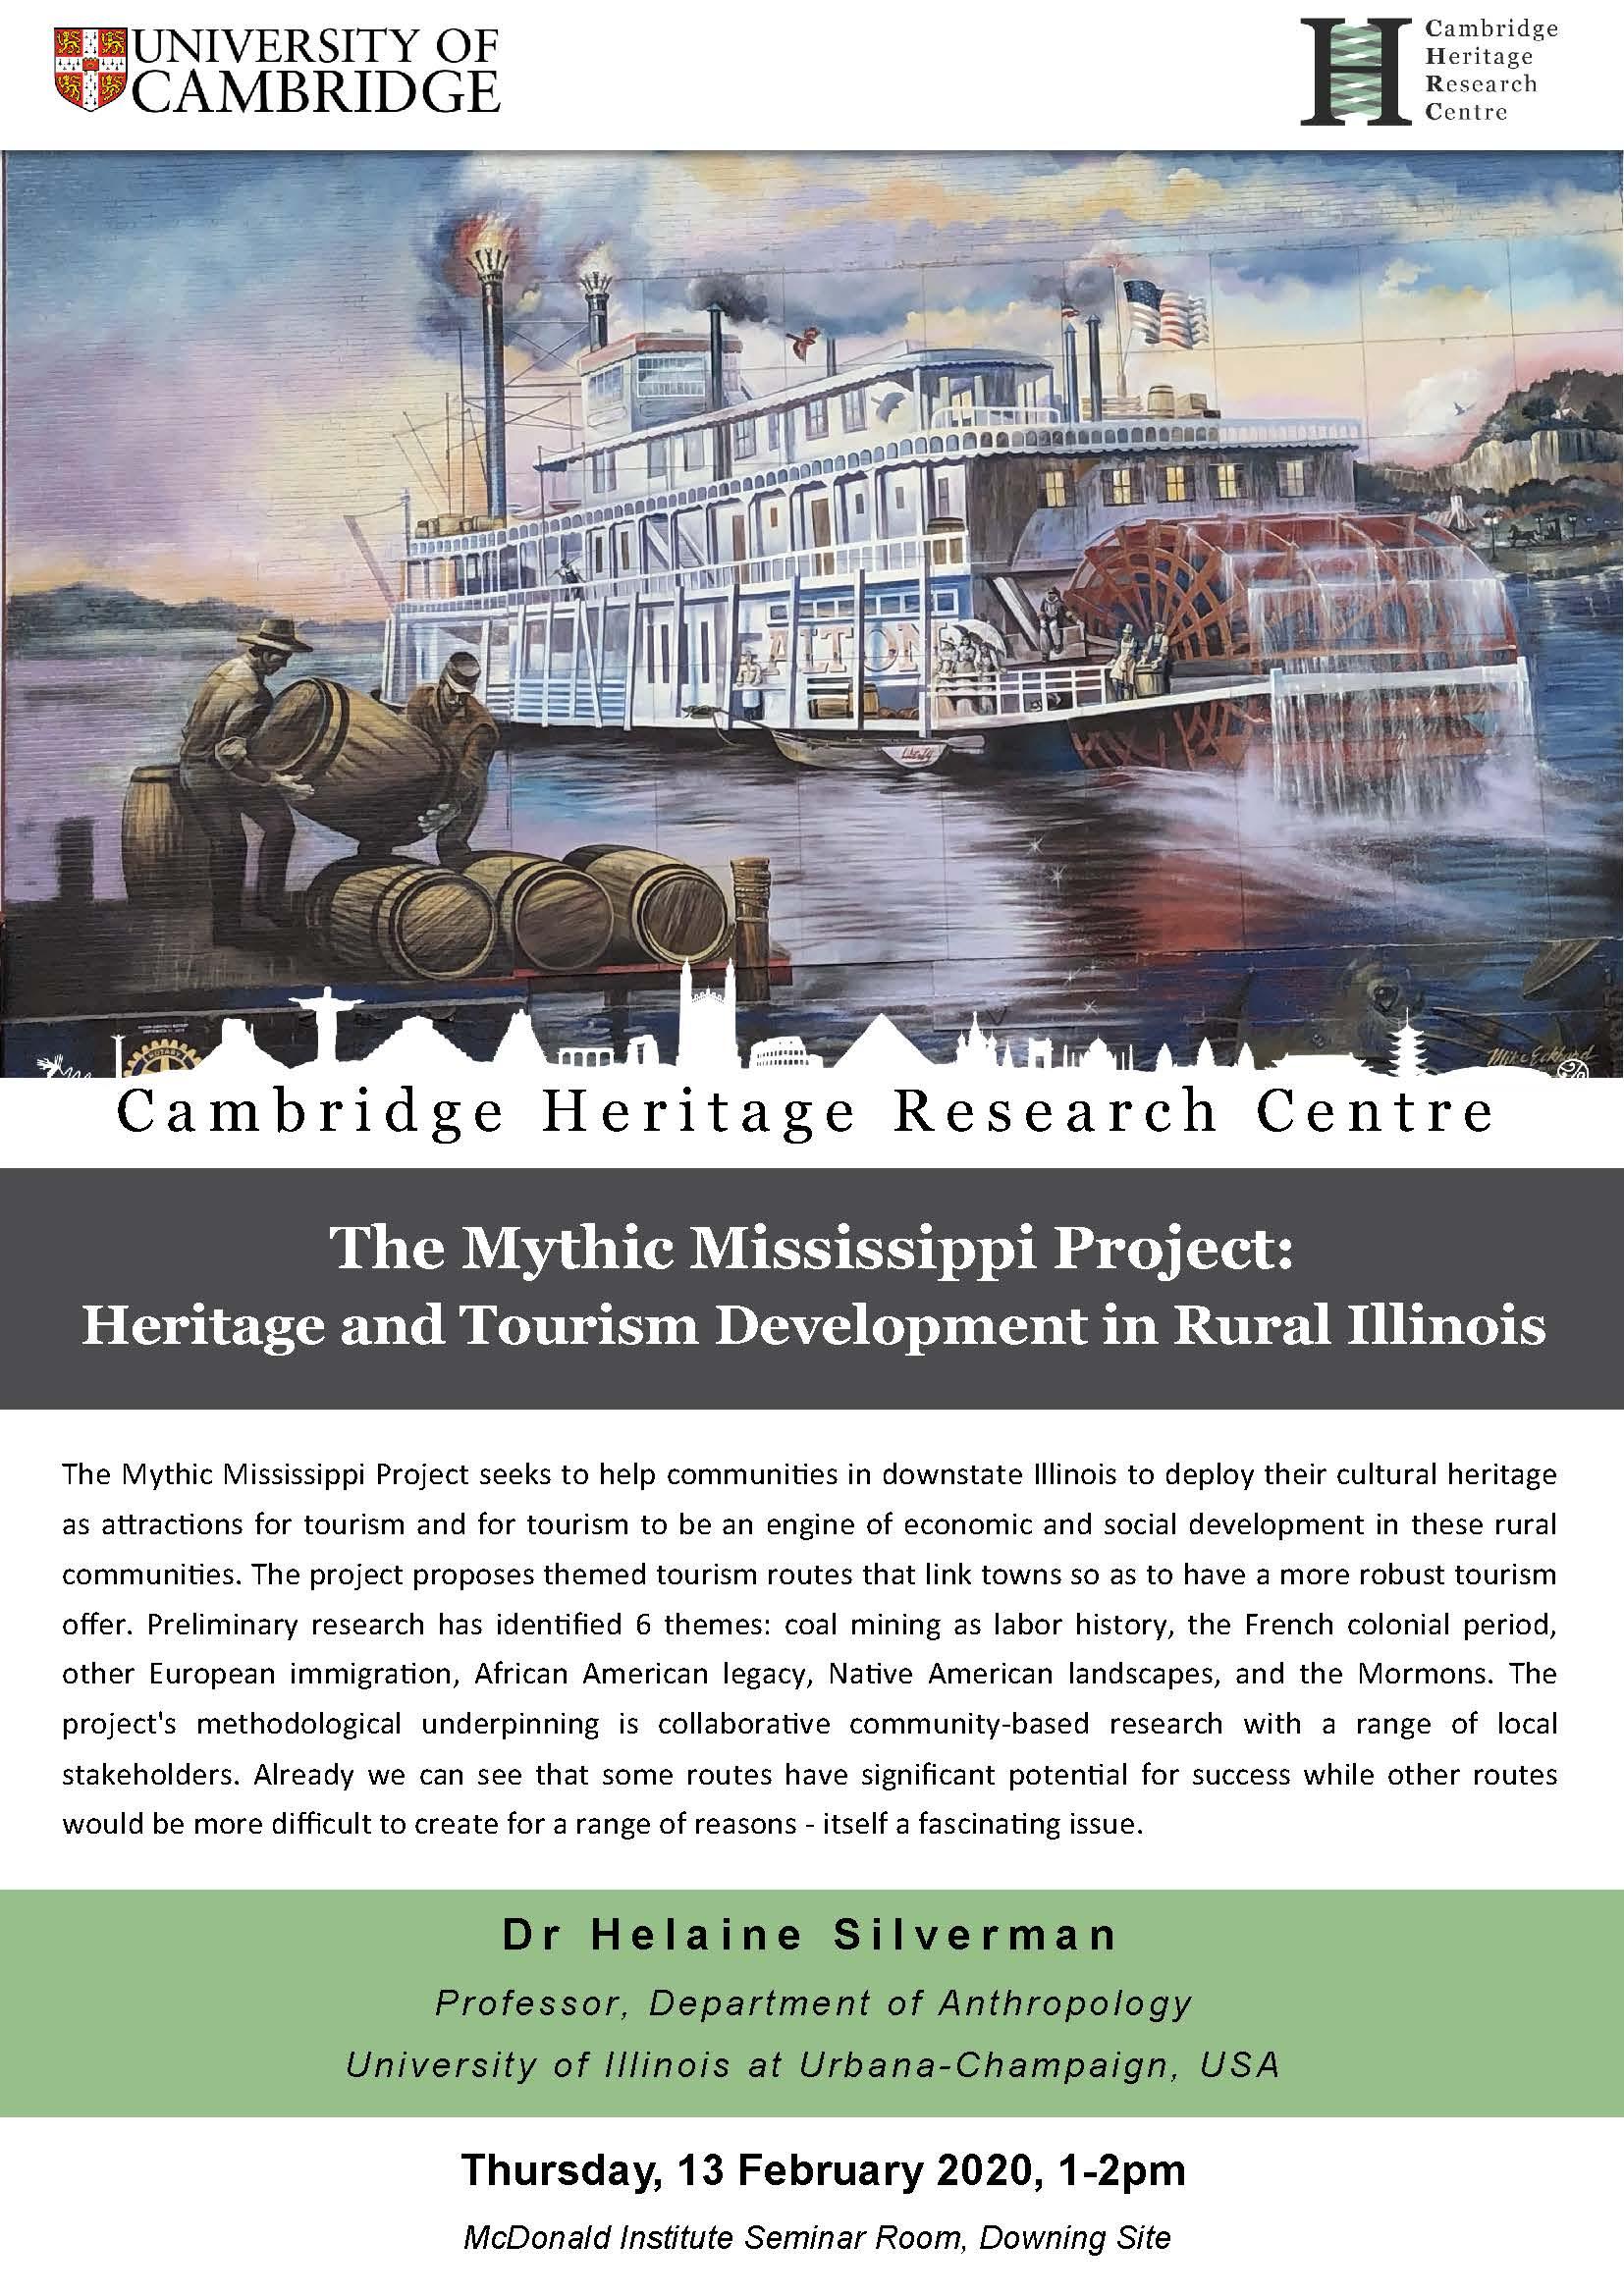  Heritage and Tourism Development in Rural Illinois